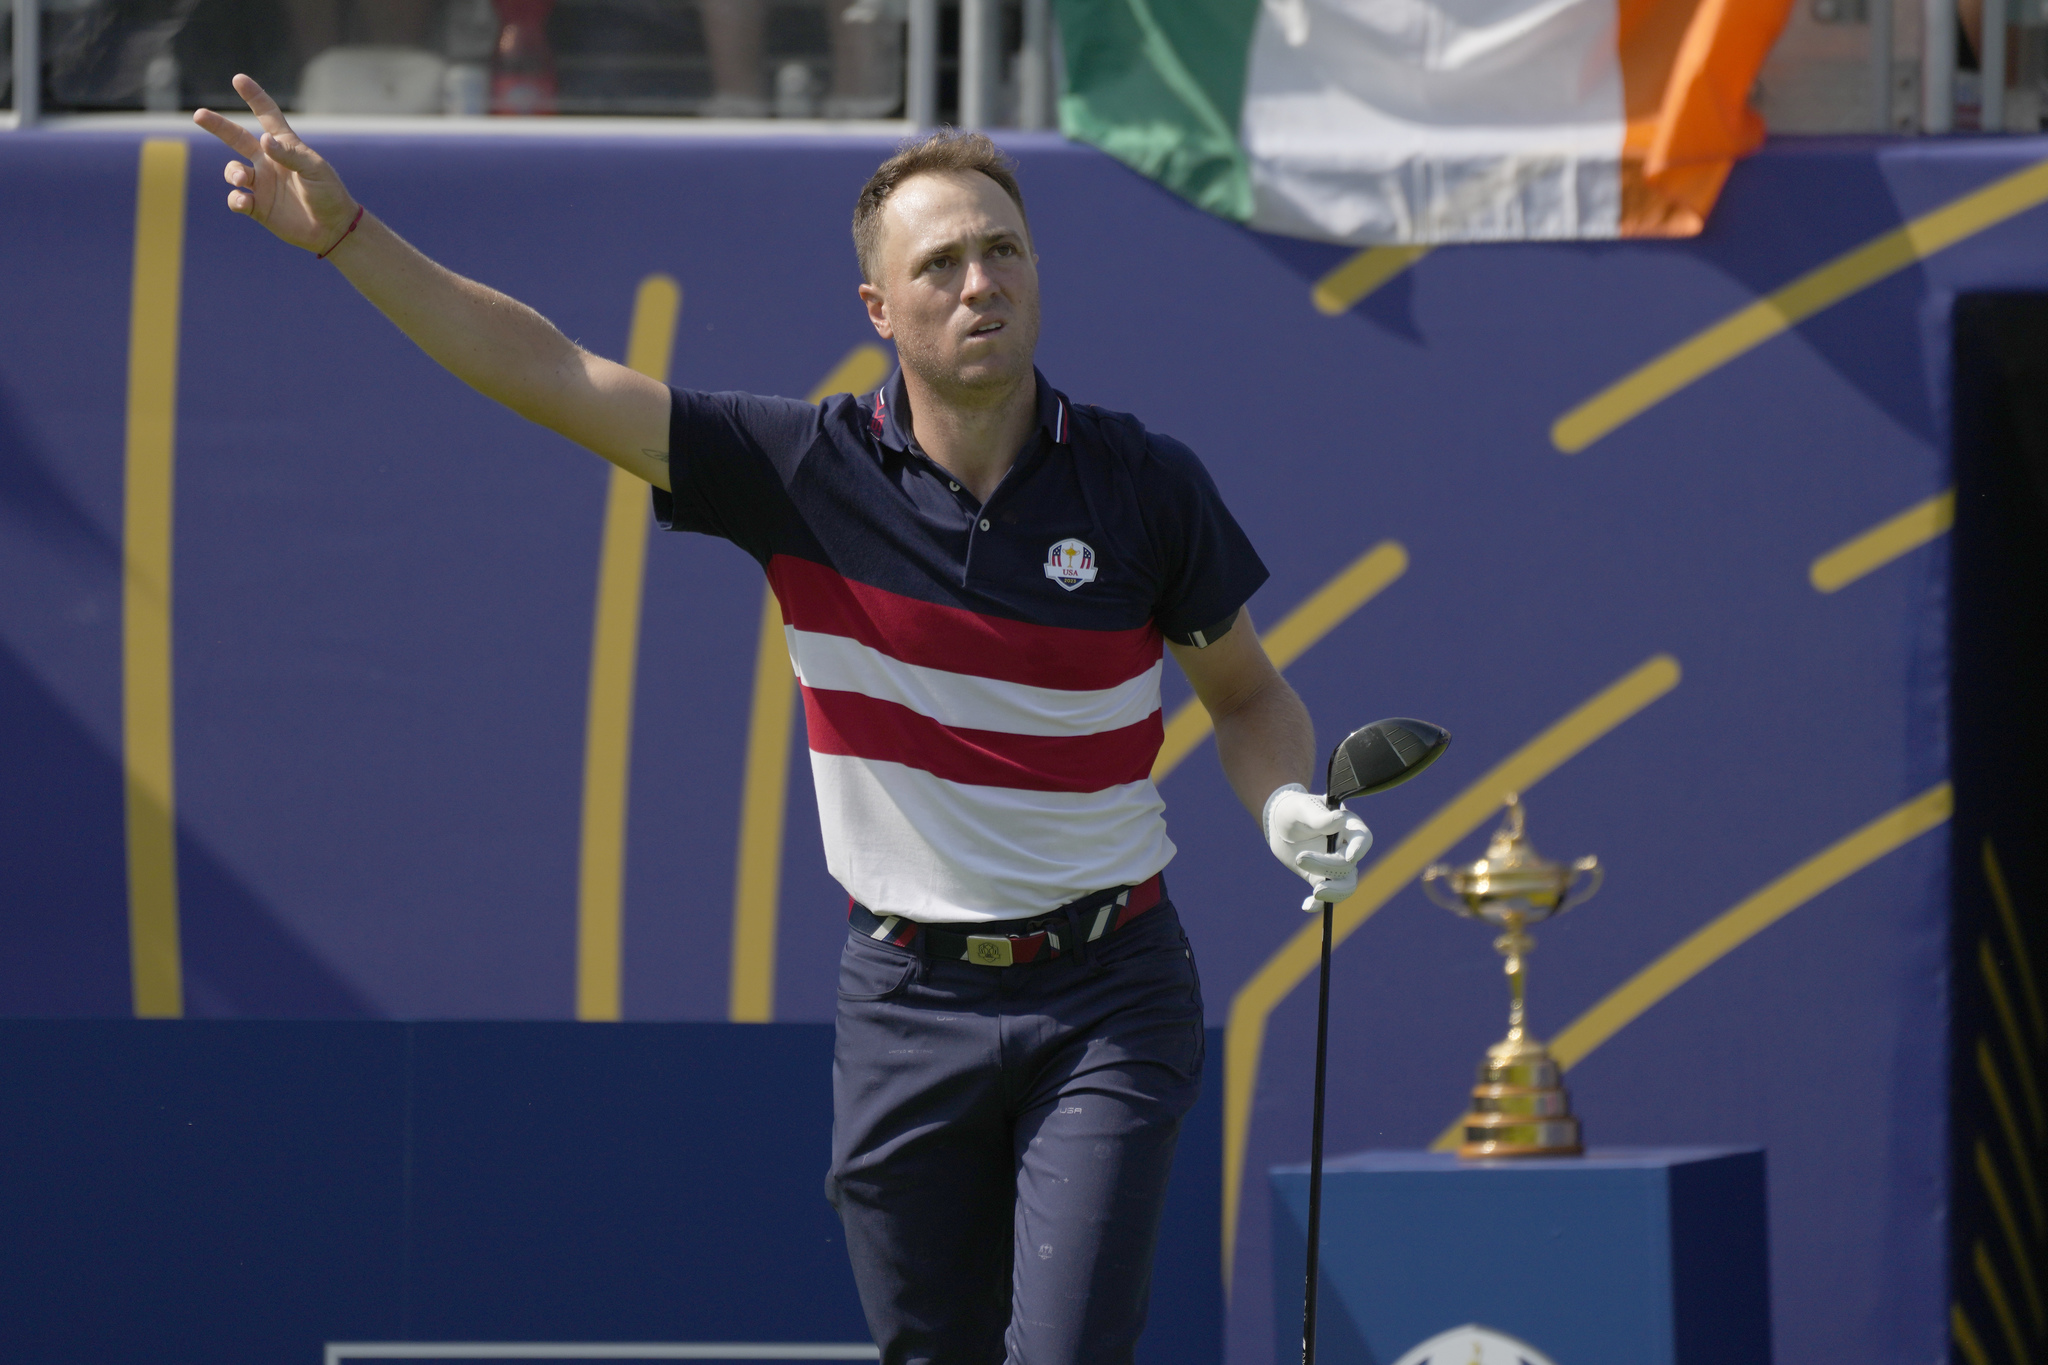 Justin Thomas reacts on the first tee as his ball goes right off the tee during his singles match at the Ryder Cup golf tournament.